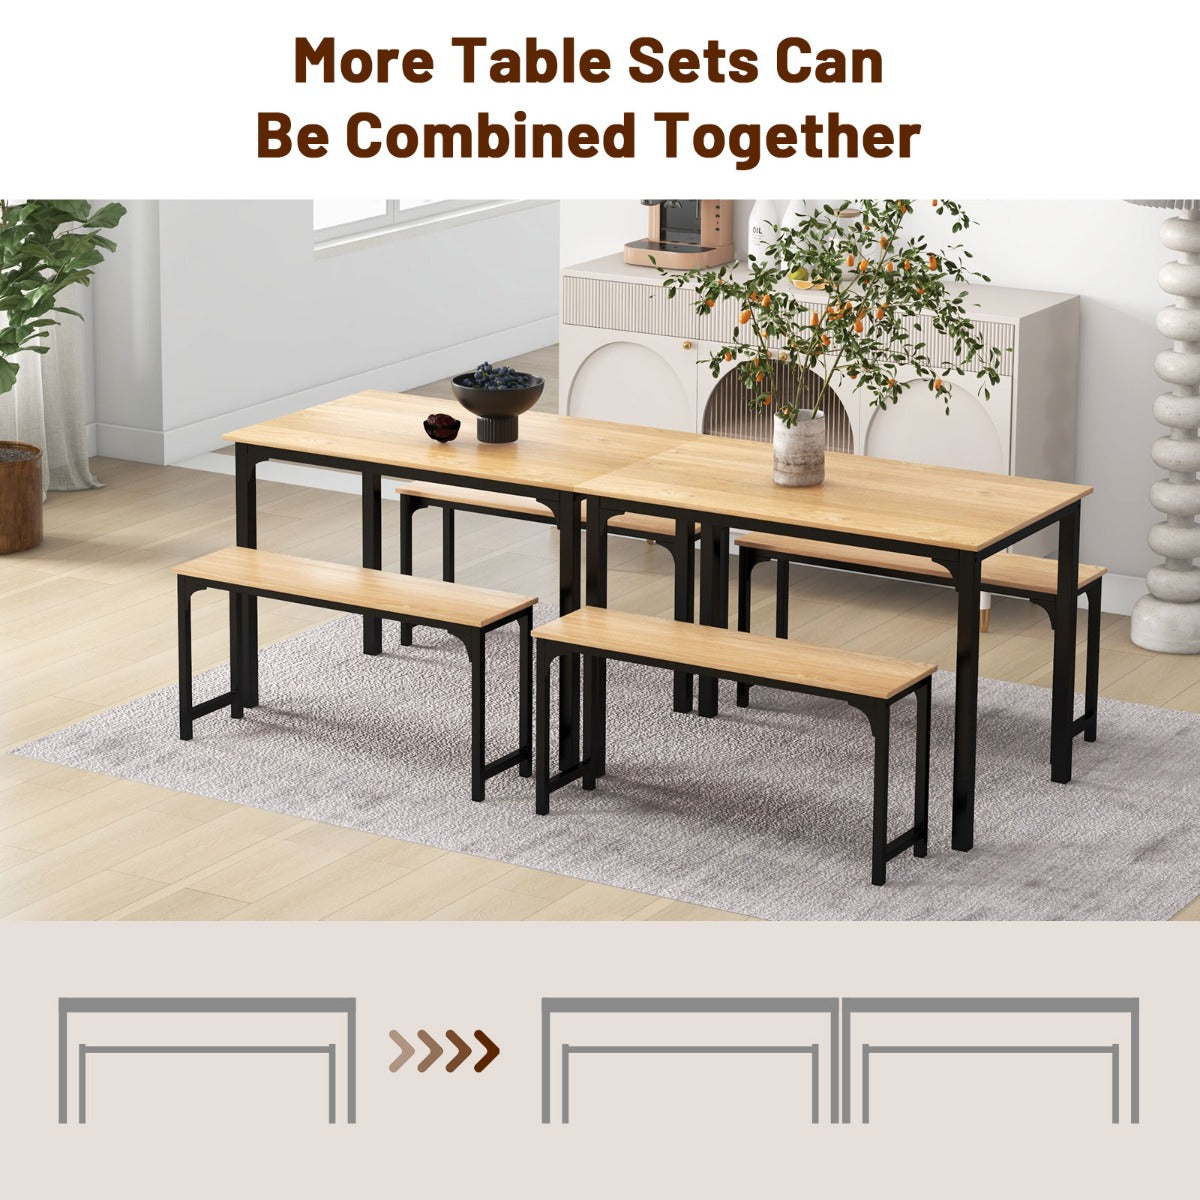 3 Pieces Space-Saving Dining Breakfast Table Set with 2 Benches-Natural